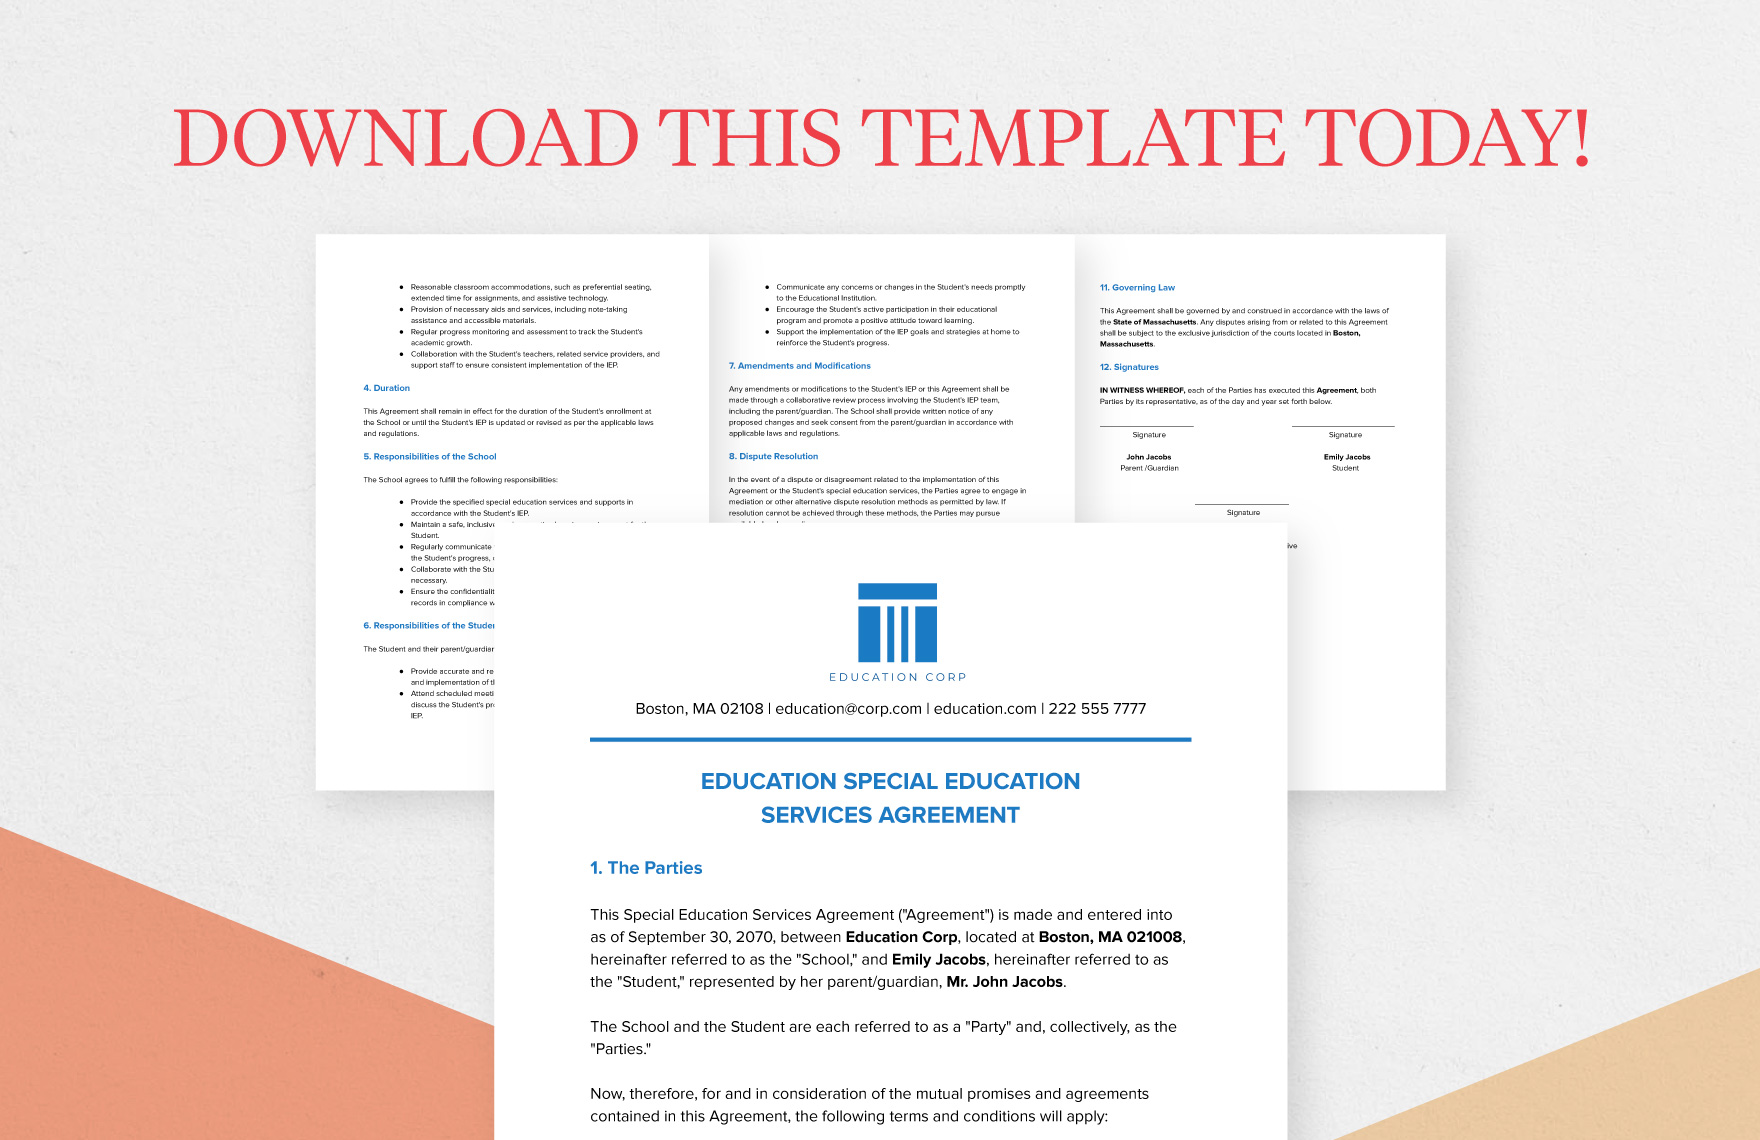 Education Special Education Services Agreement Template